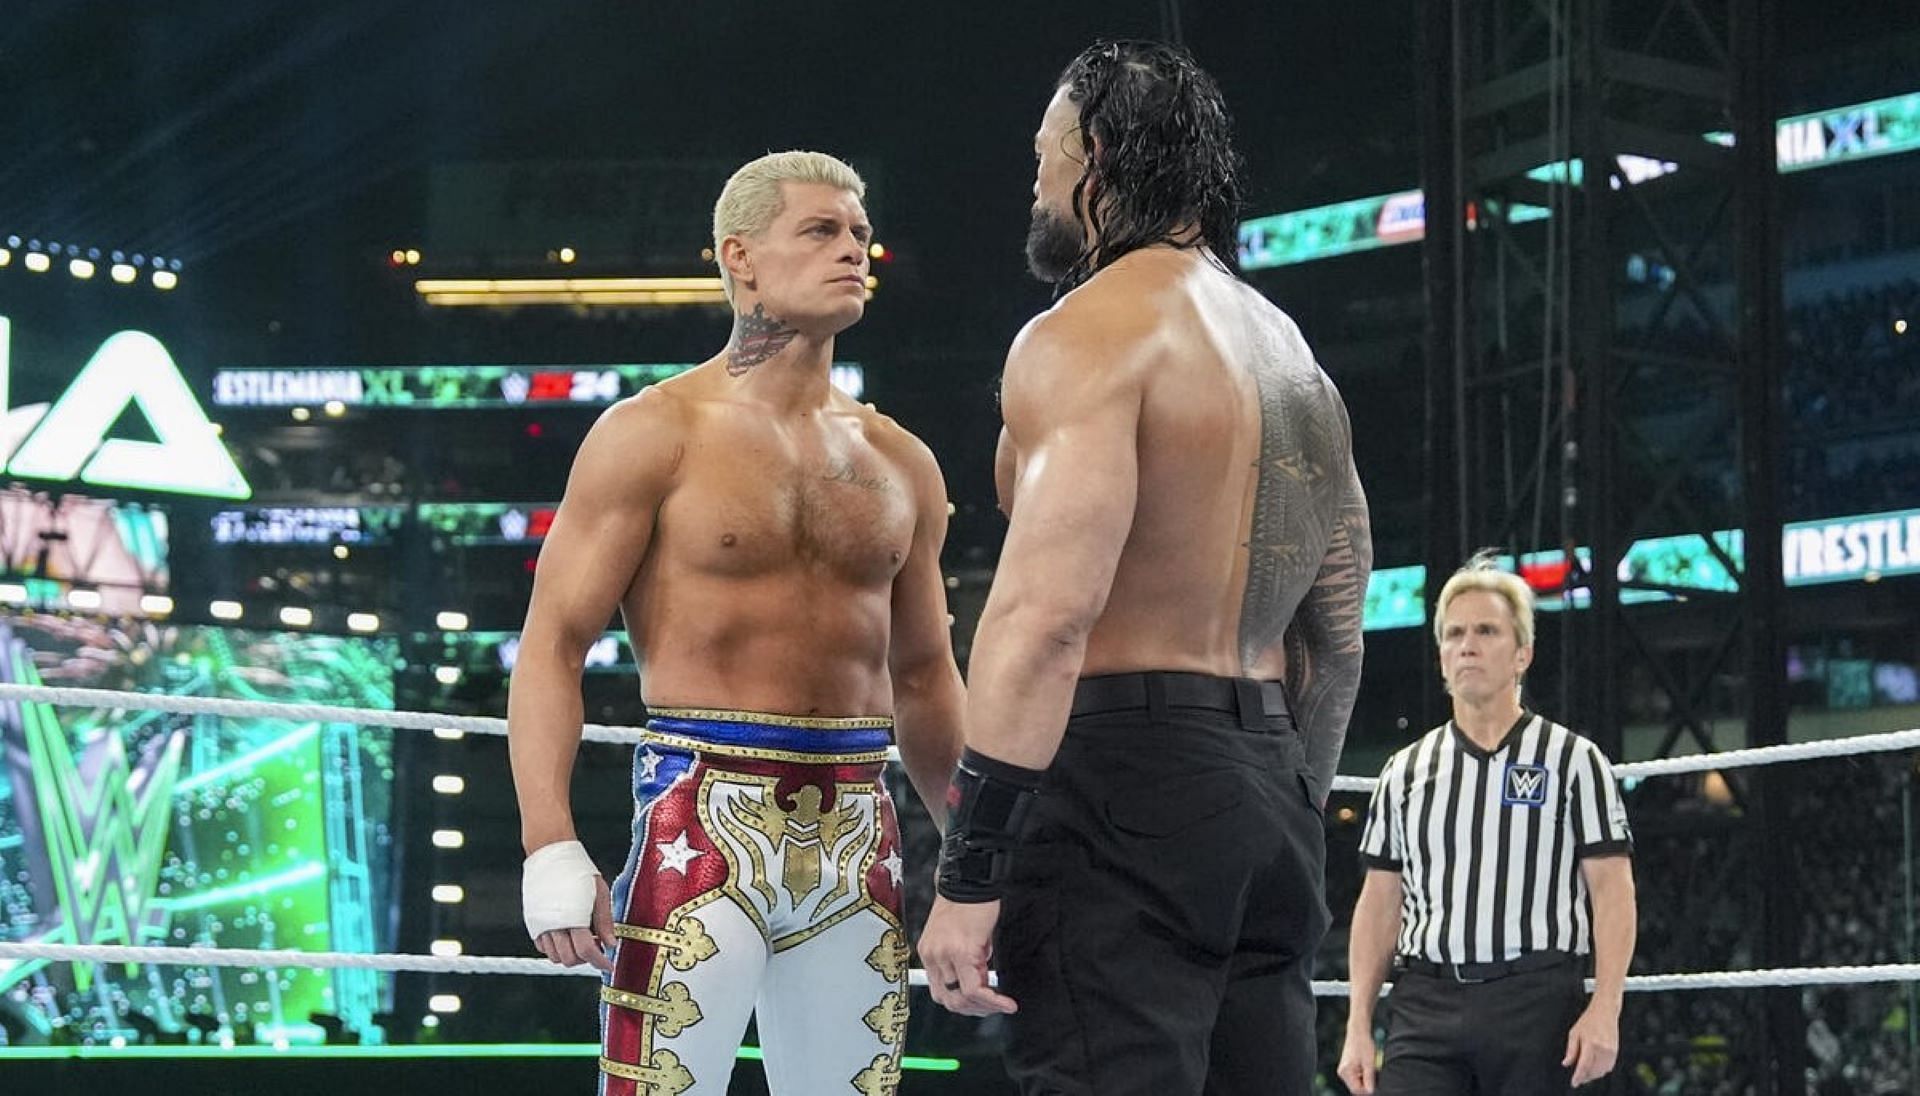 Cody Rhodes finally ended the title run of Roman Reigns